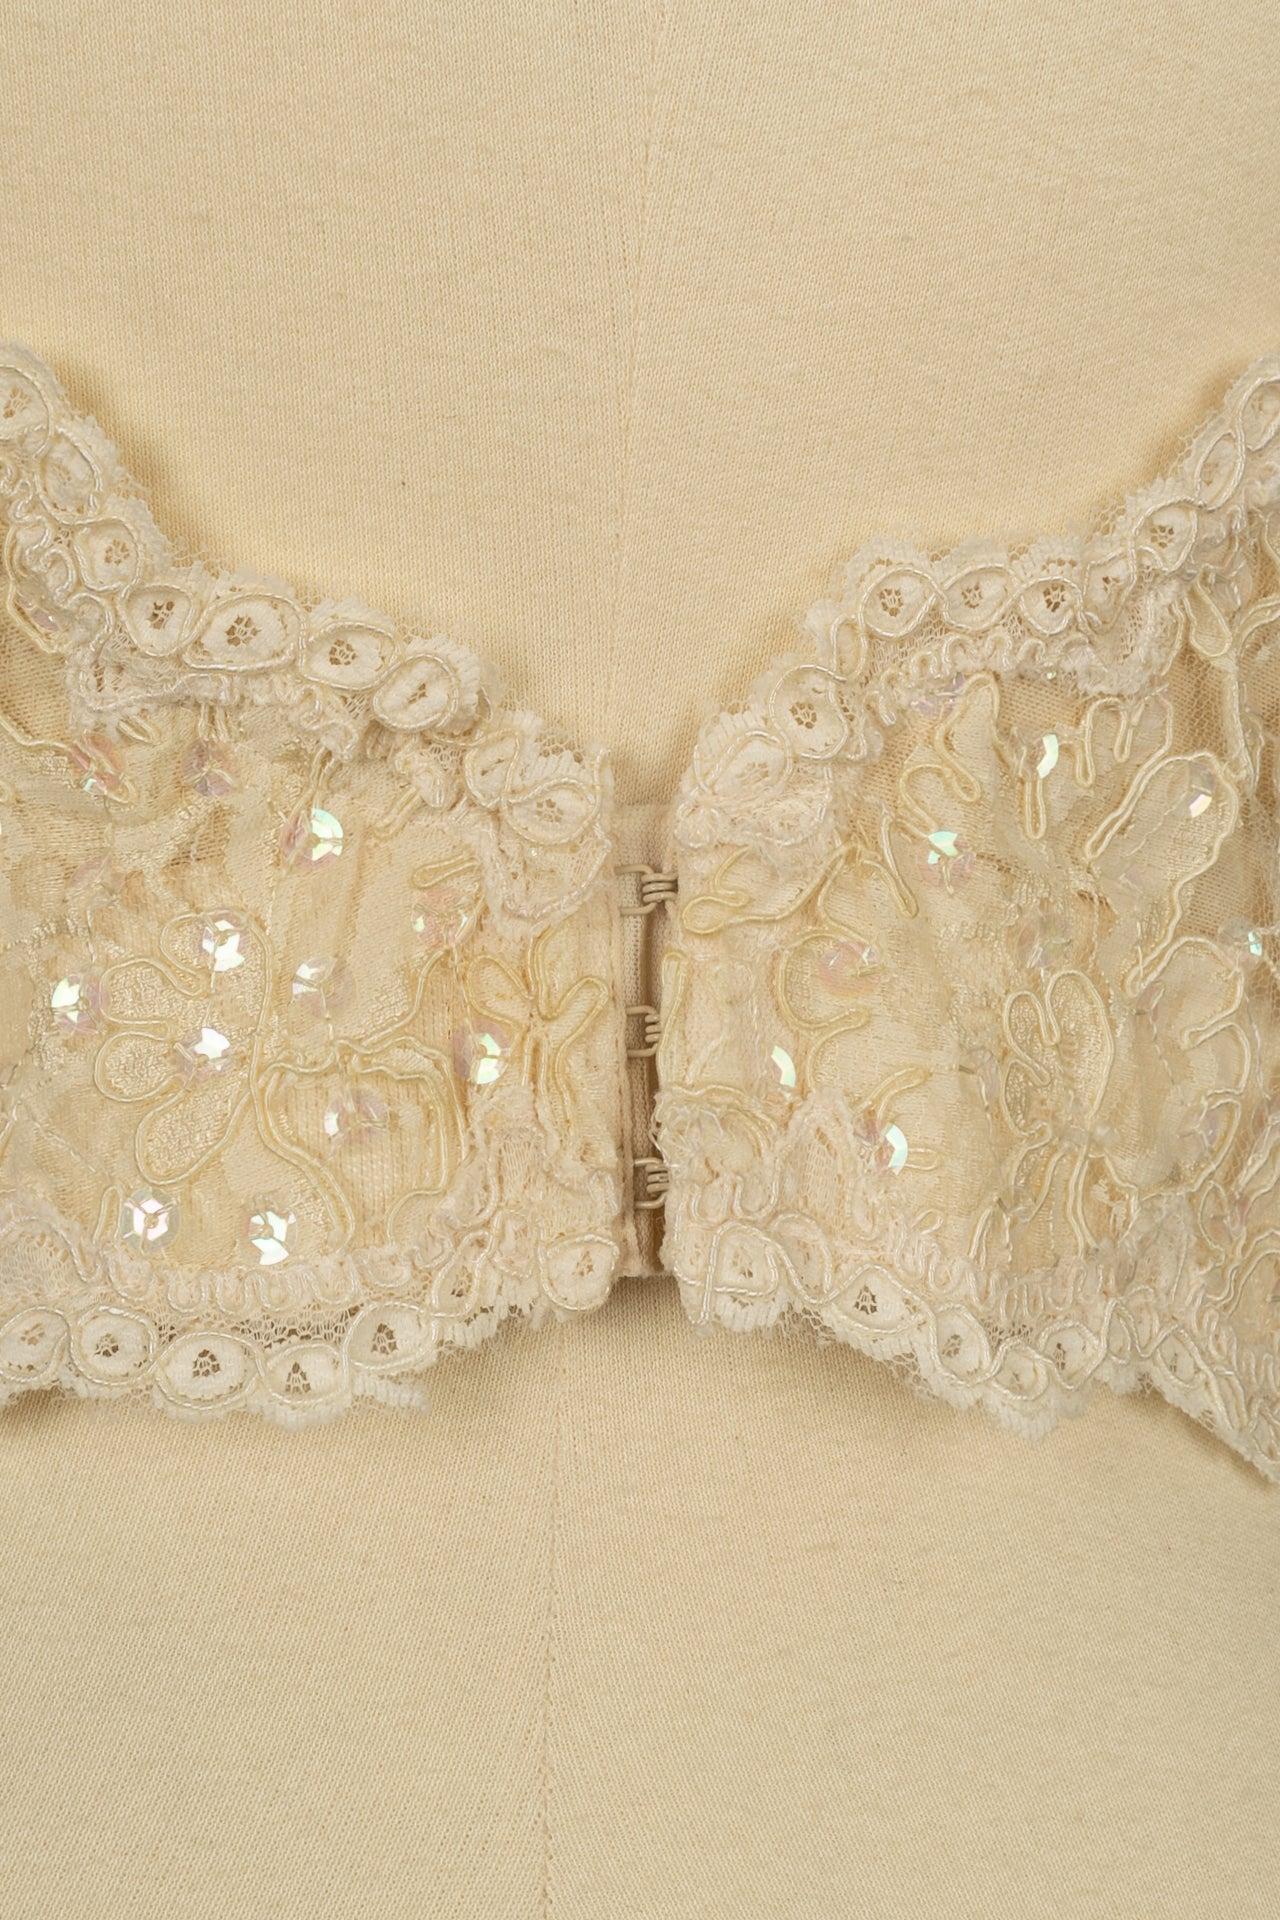 Vintage Top / Corset in White Lace and Sequins For Sale 1